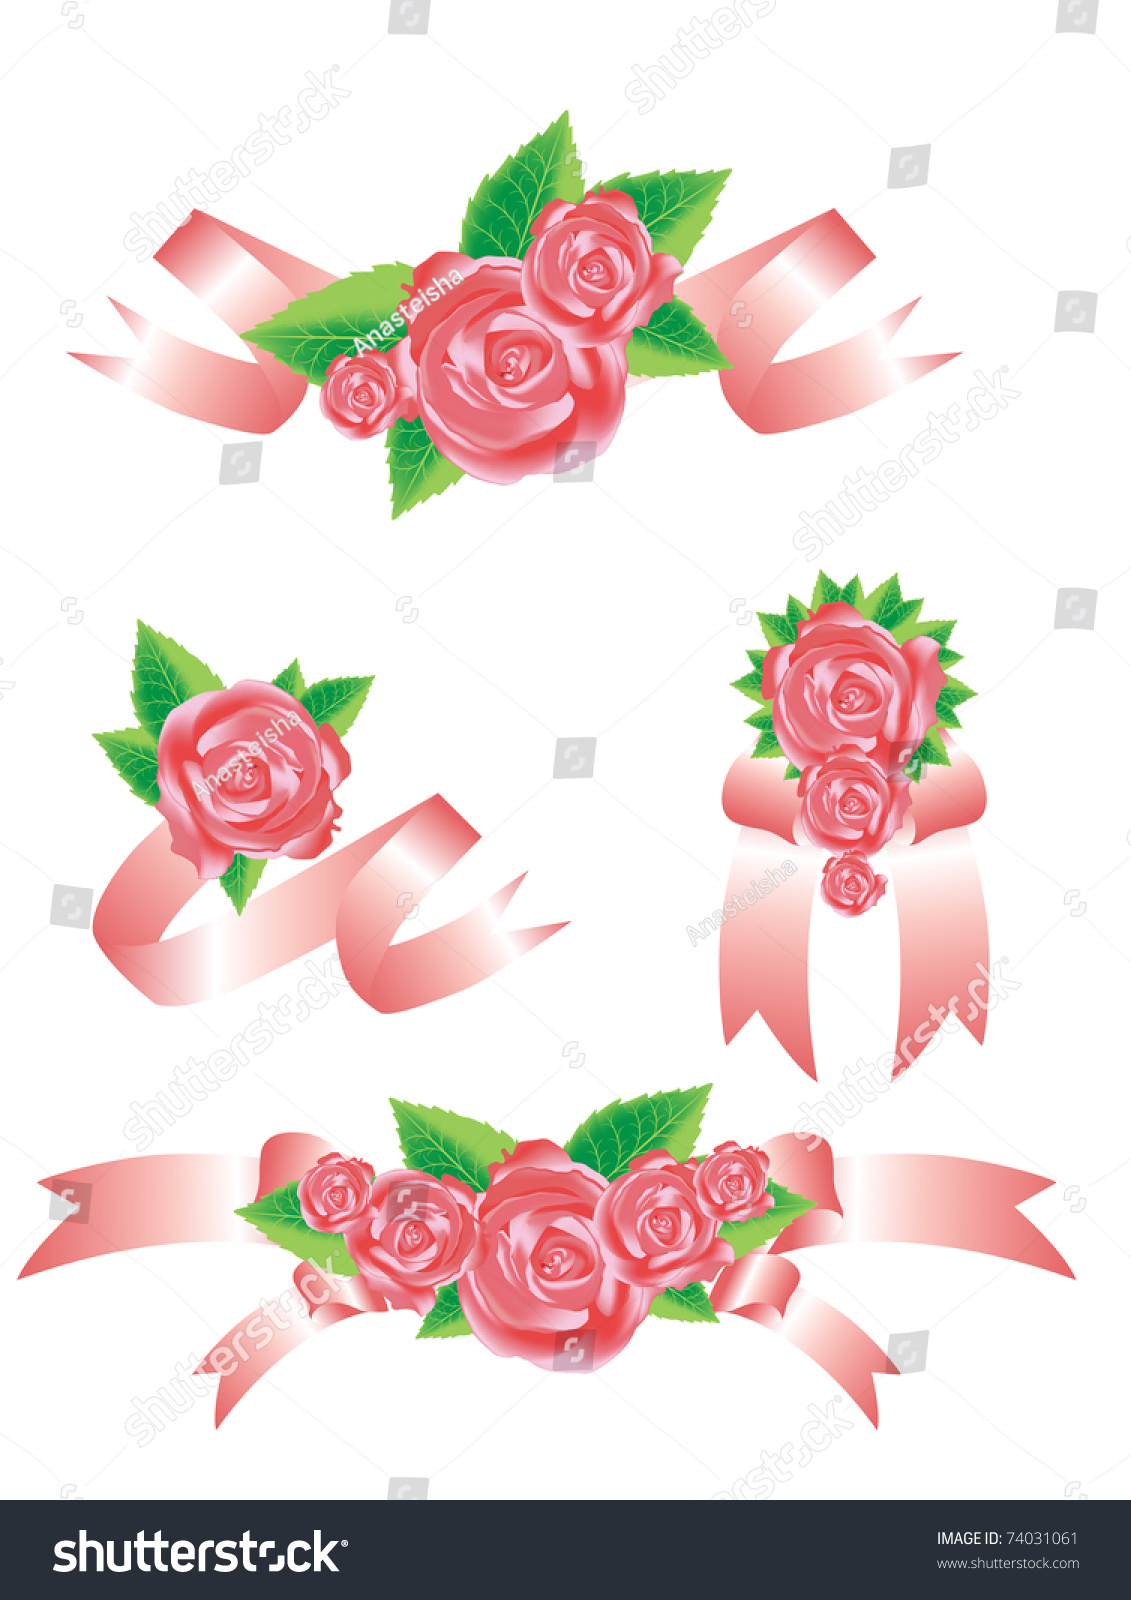 Collection Of Vector Rose With Ribbons 74031061 Shutterstock